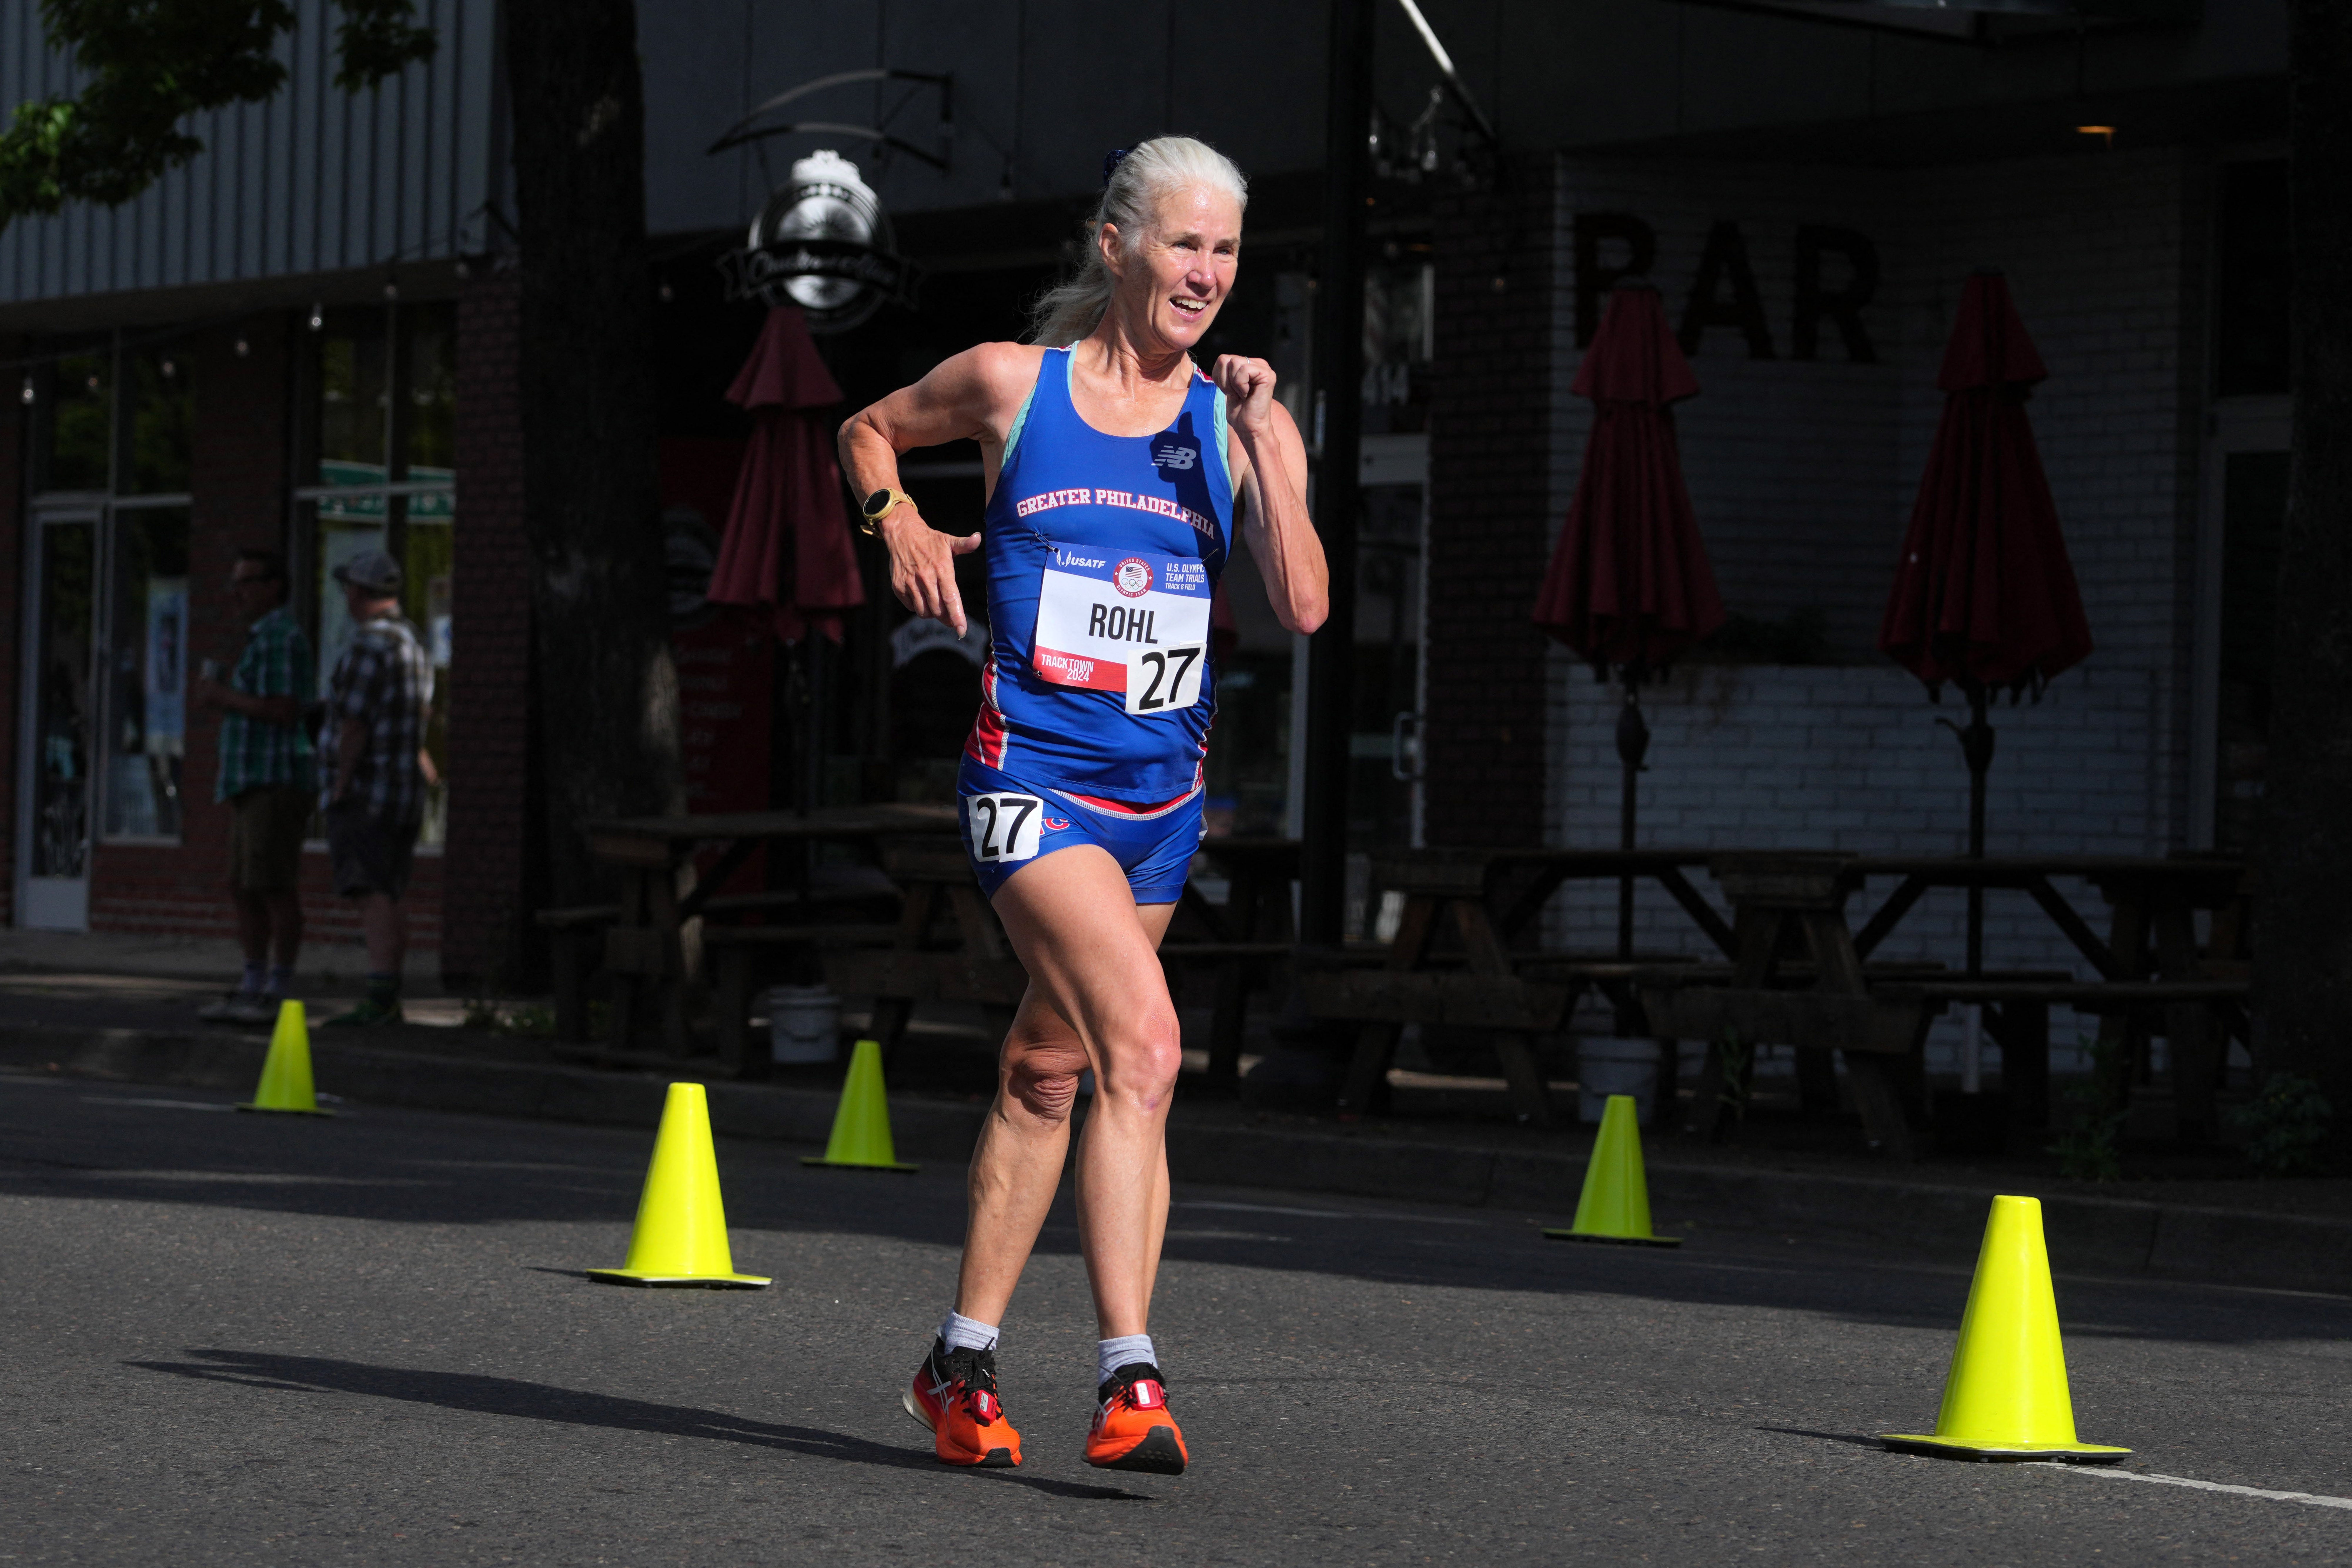 Michelle Rohl, 58, competing during the Olympic trials in Oregon on Saturday. She returned to the sport after two decades in retirement